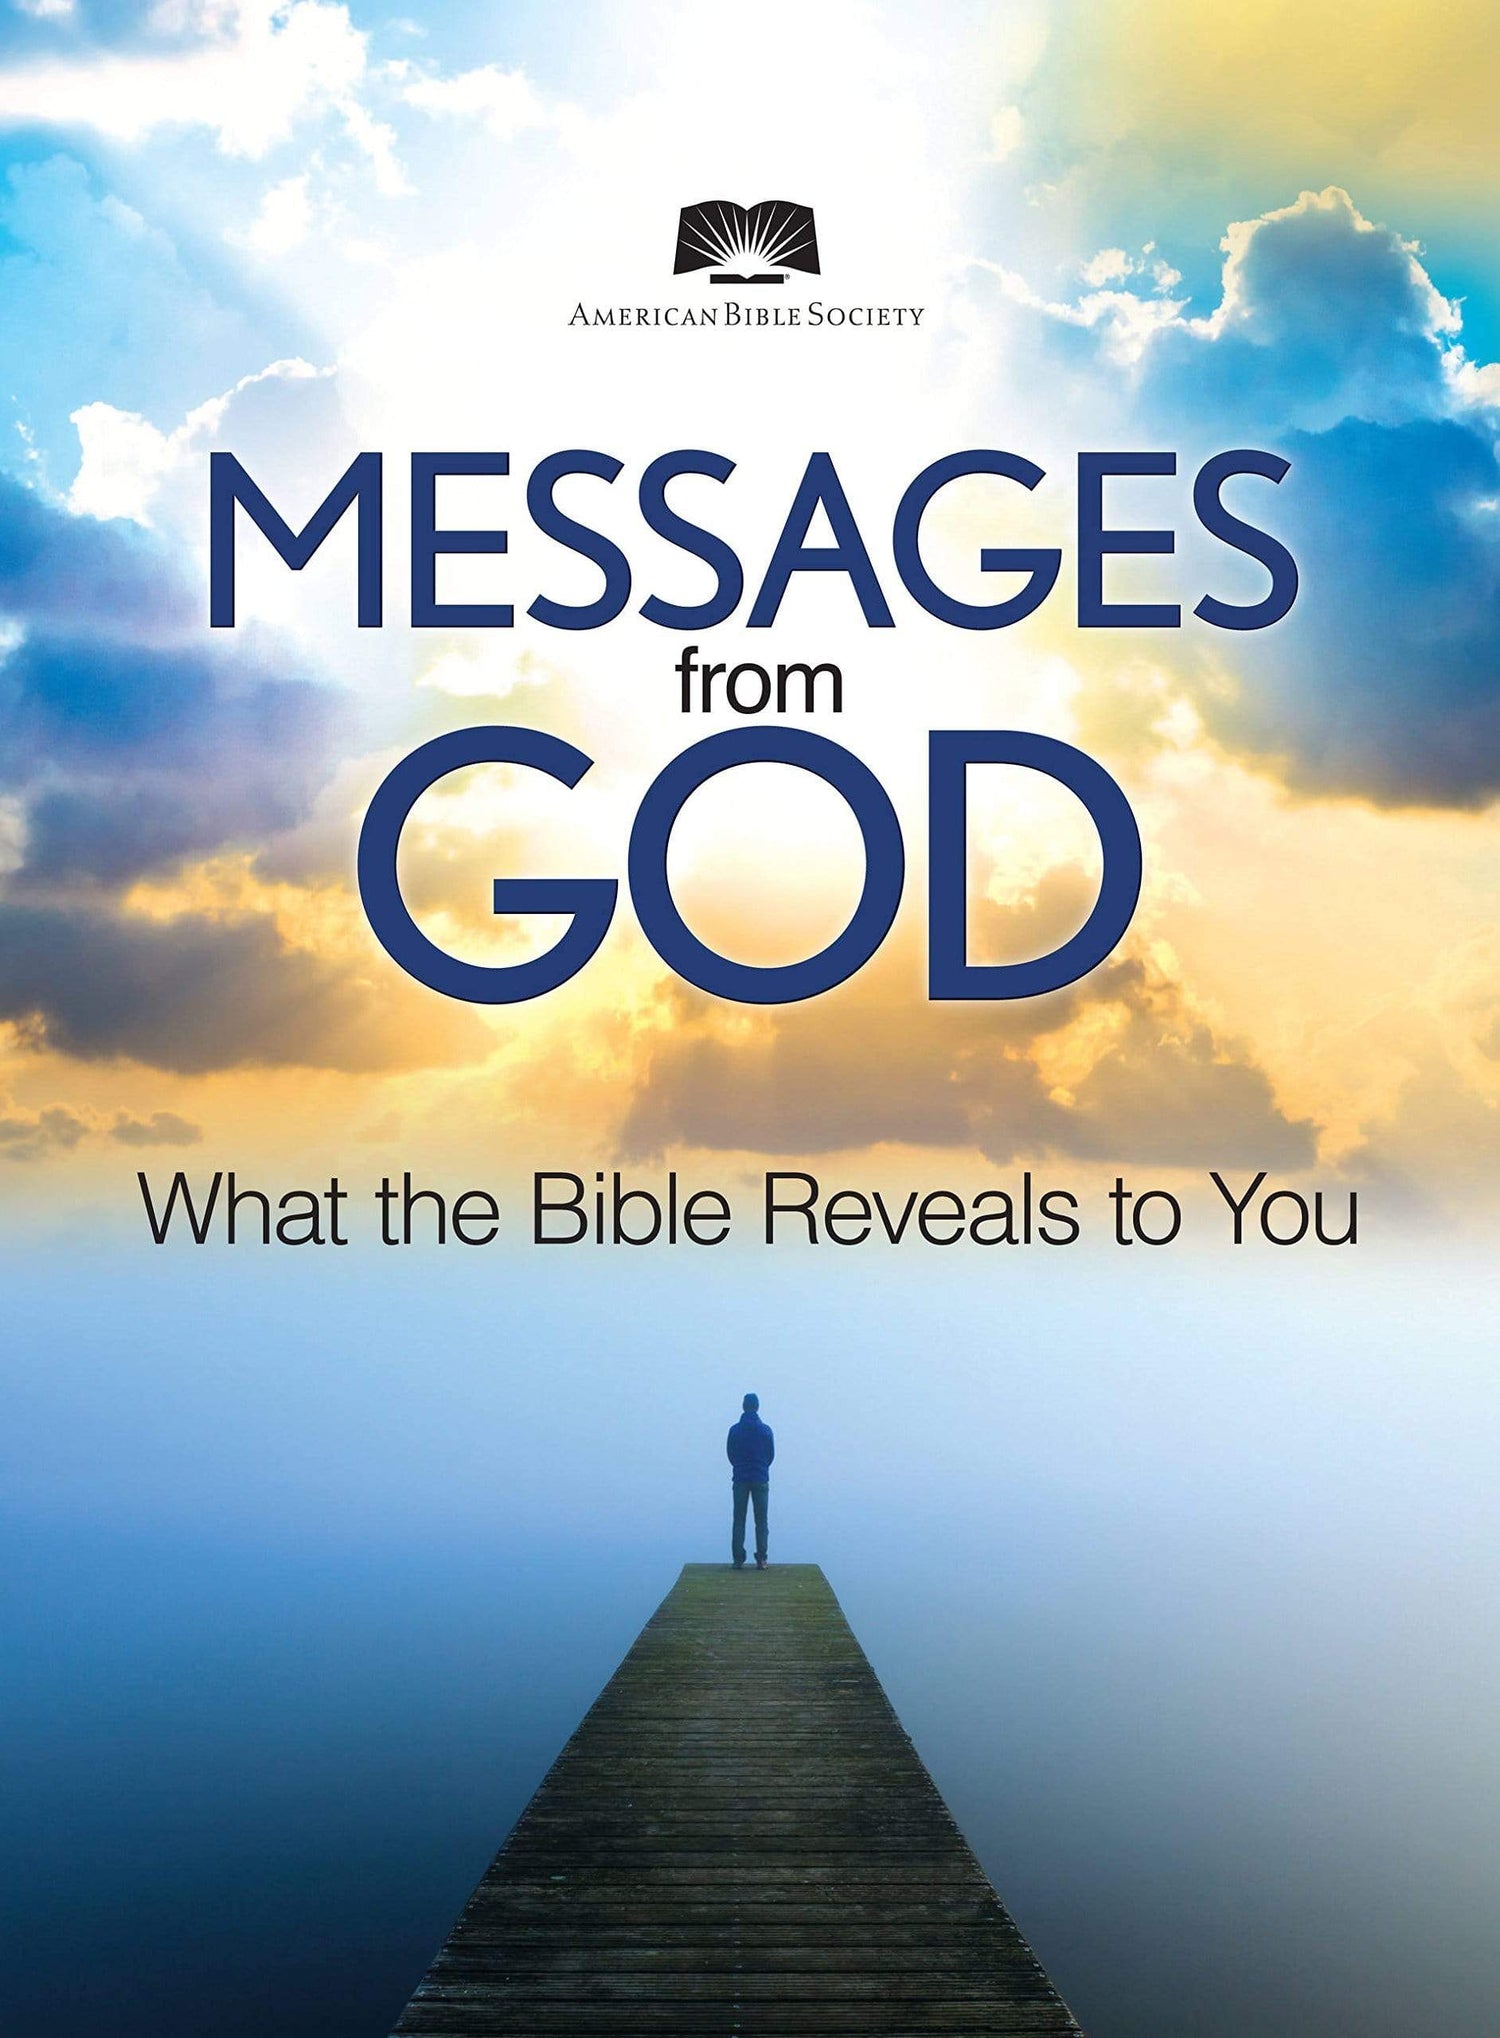 MESSAGES FROM GOD (AMER. BIBLE SOCIETY)